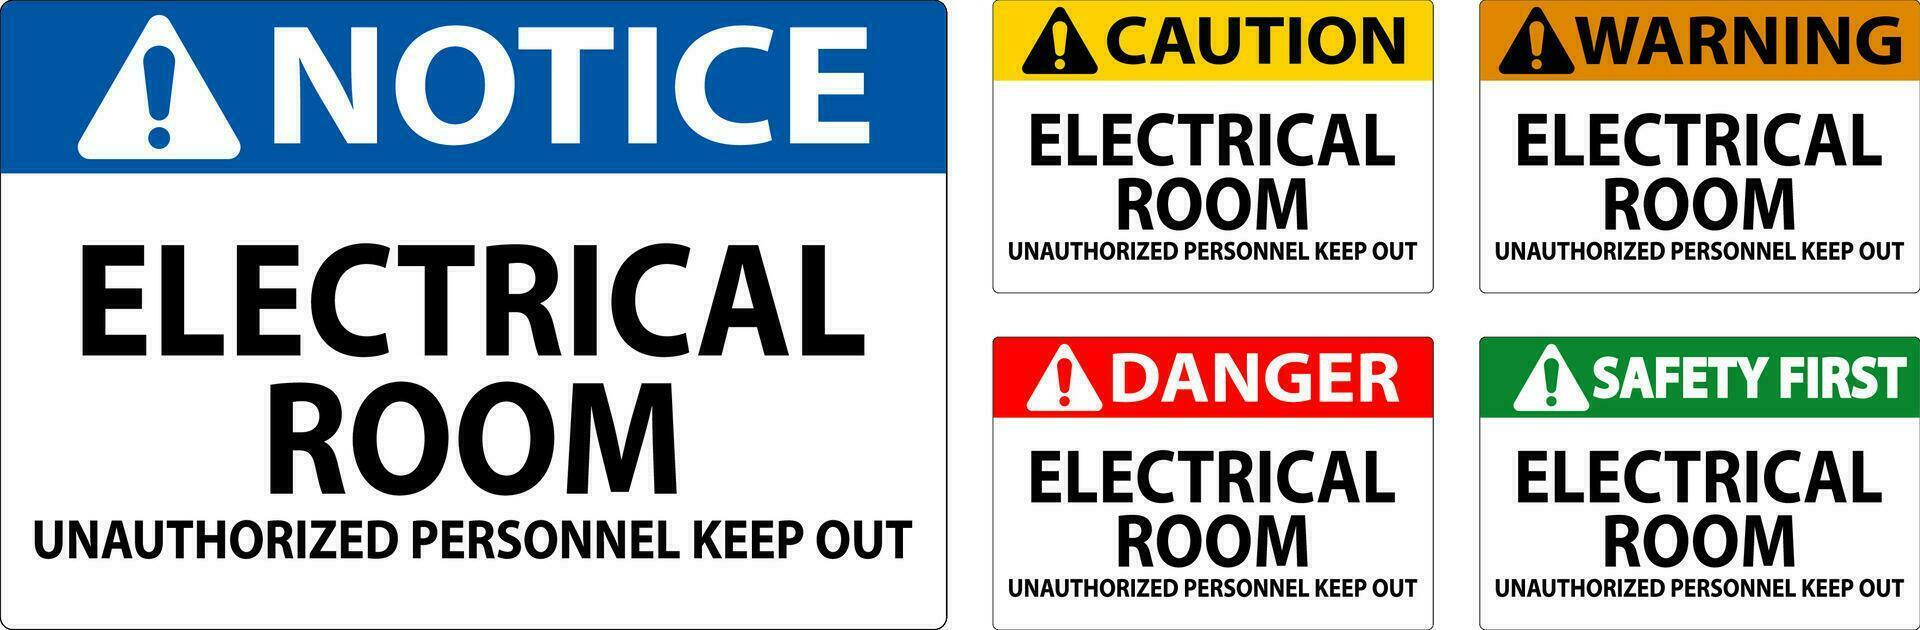 Danger Sign Electrical Room - Unauthorized Personnel Keep Out vector